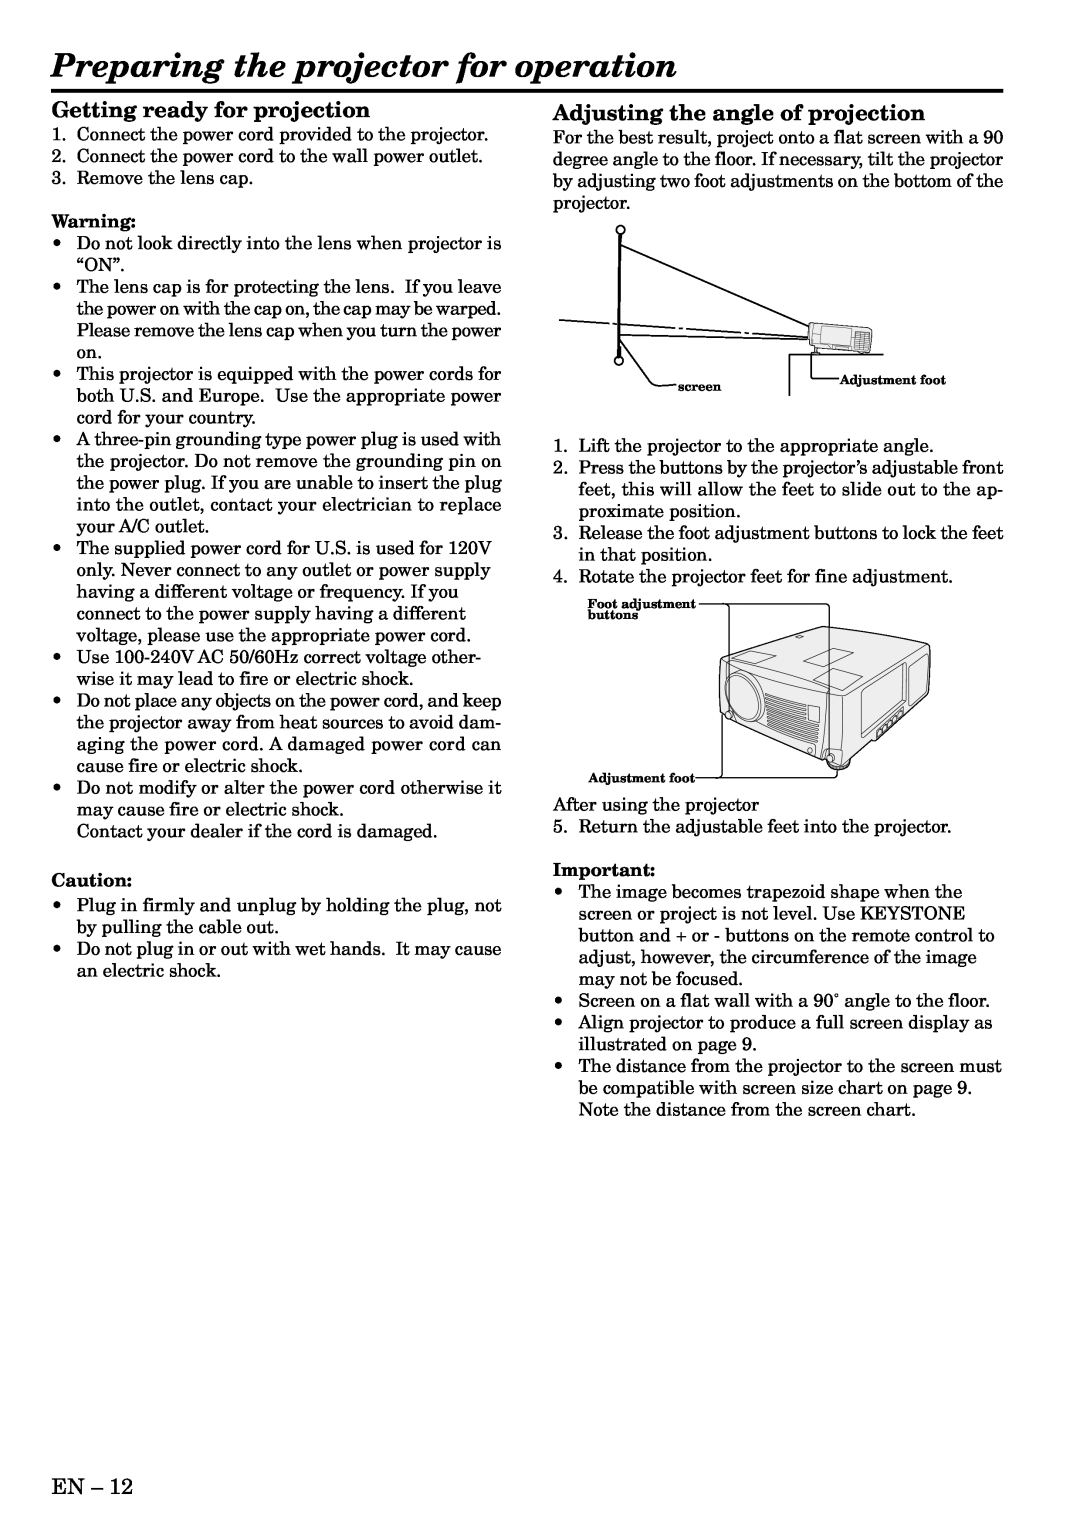 Mitsubishi Electronics X500U user manual Preparing the projector for operation, Getting ready for projection 